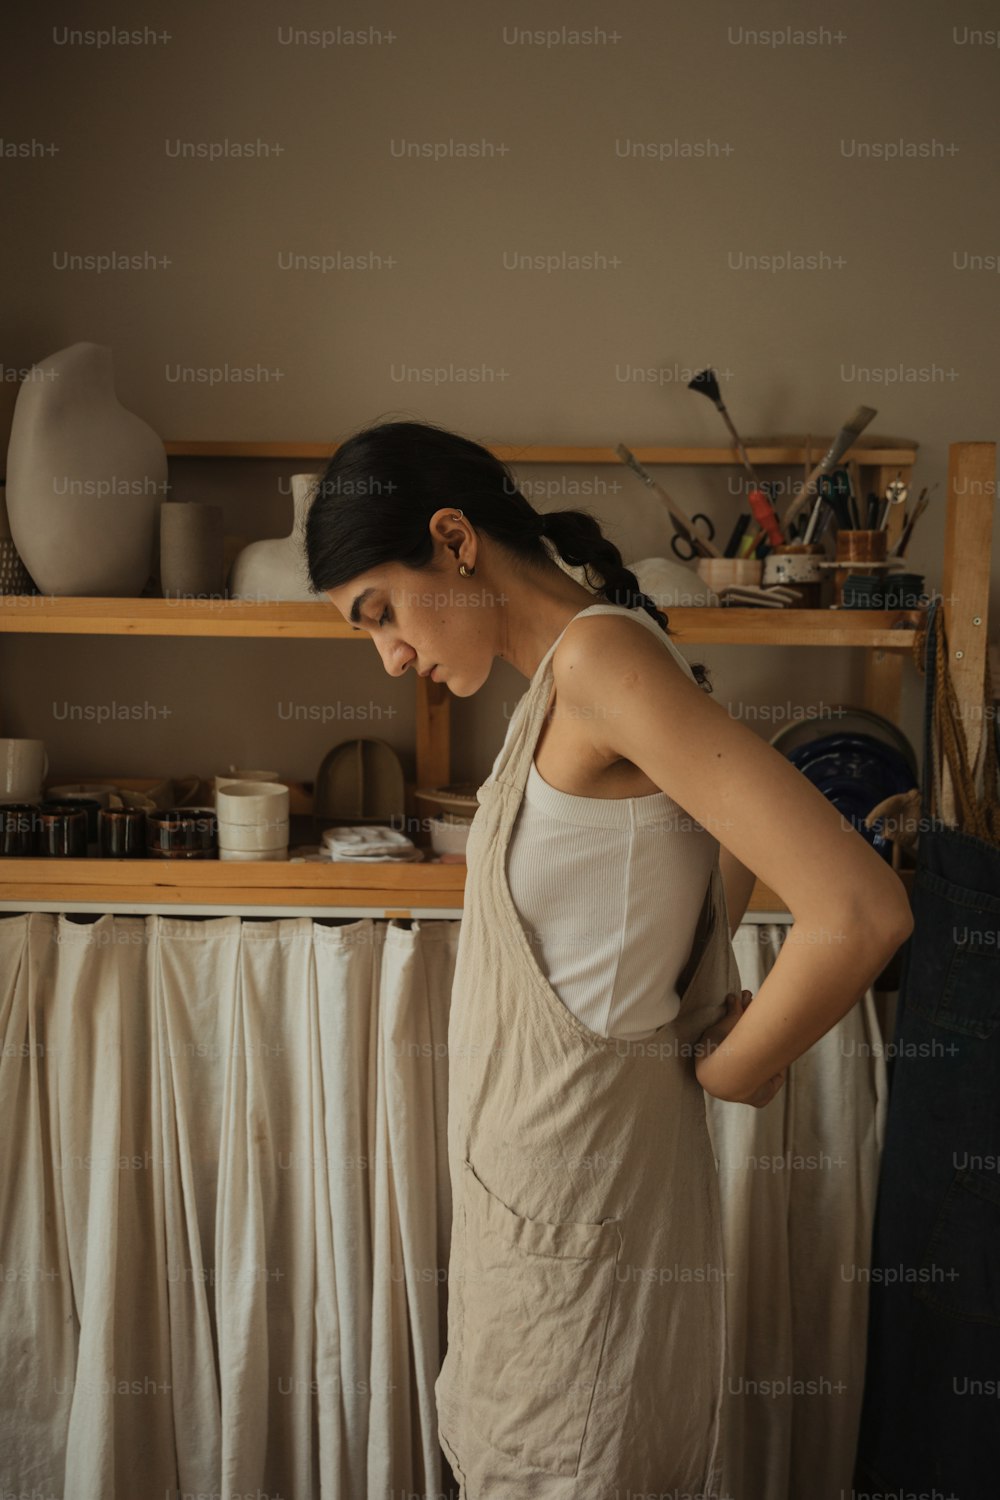 a woman standing in front of a shelf with dishes on it